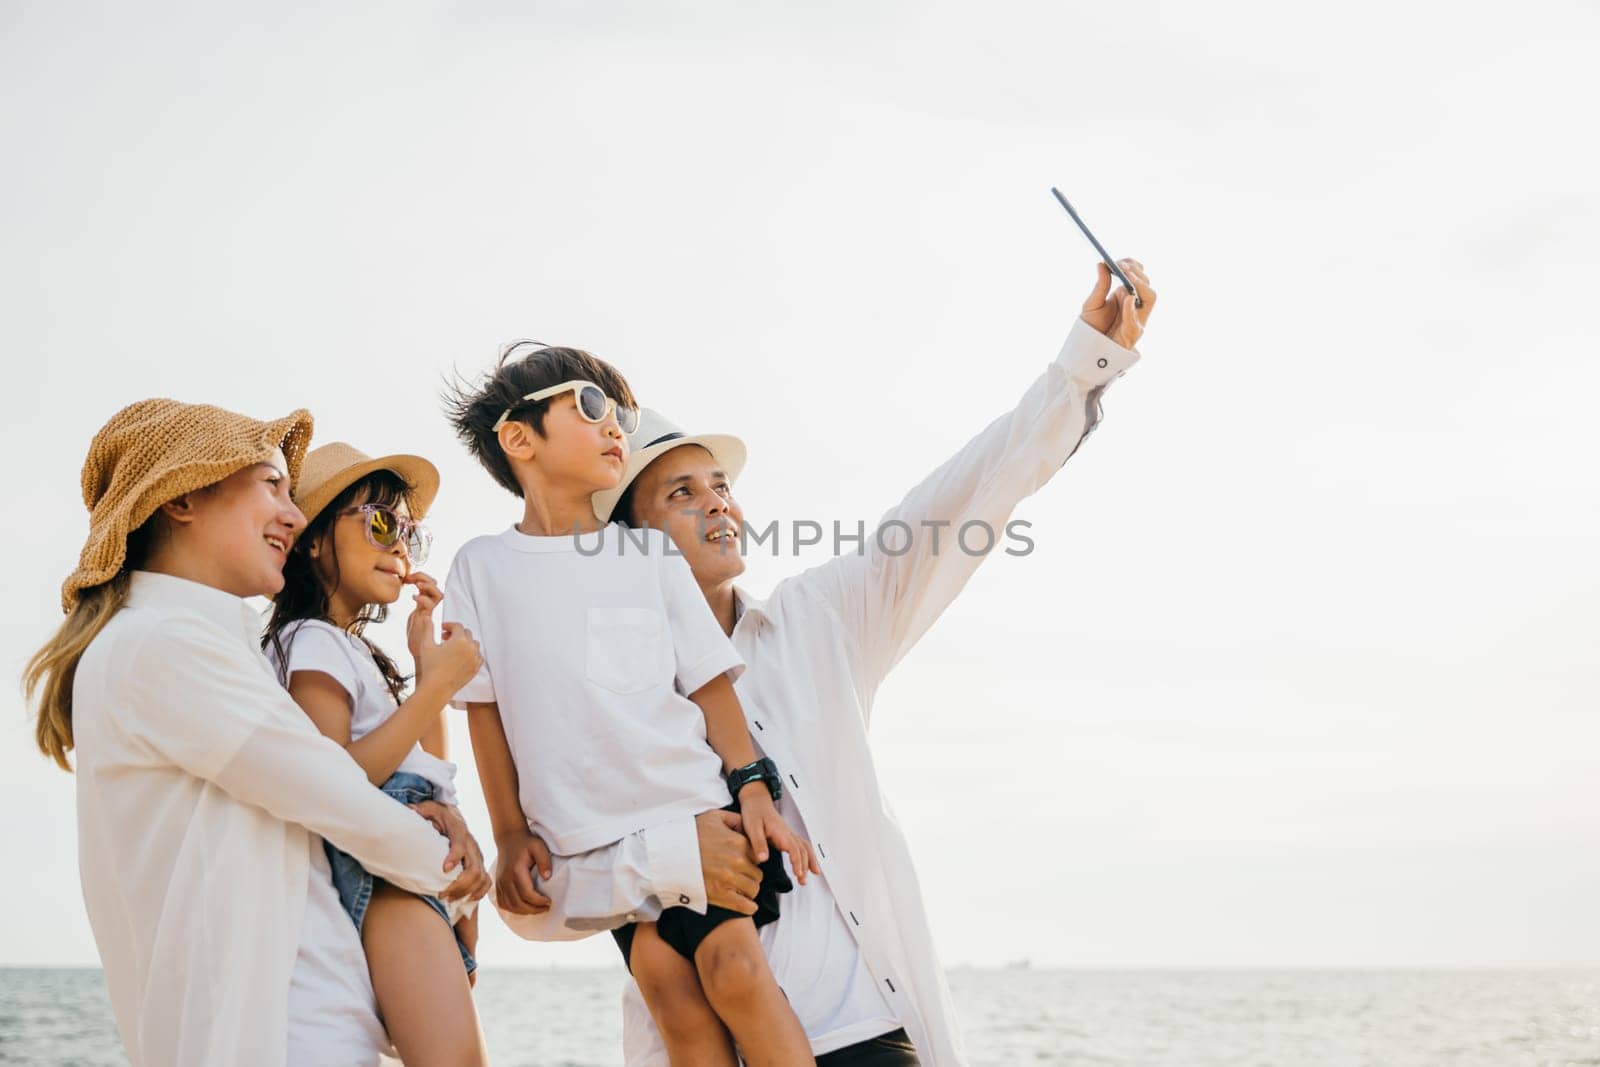 Beachside family fun as they take a cheerful selfie together near the sea. Laughter and joy unfold creating a playful and memorable moment of togetherness during a summer travel adventure. by Sorapop